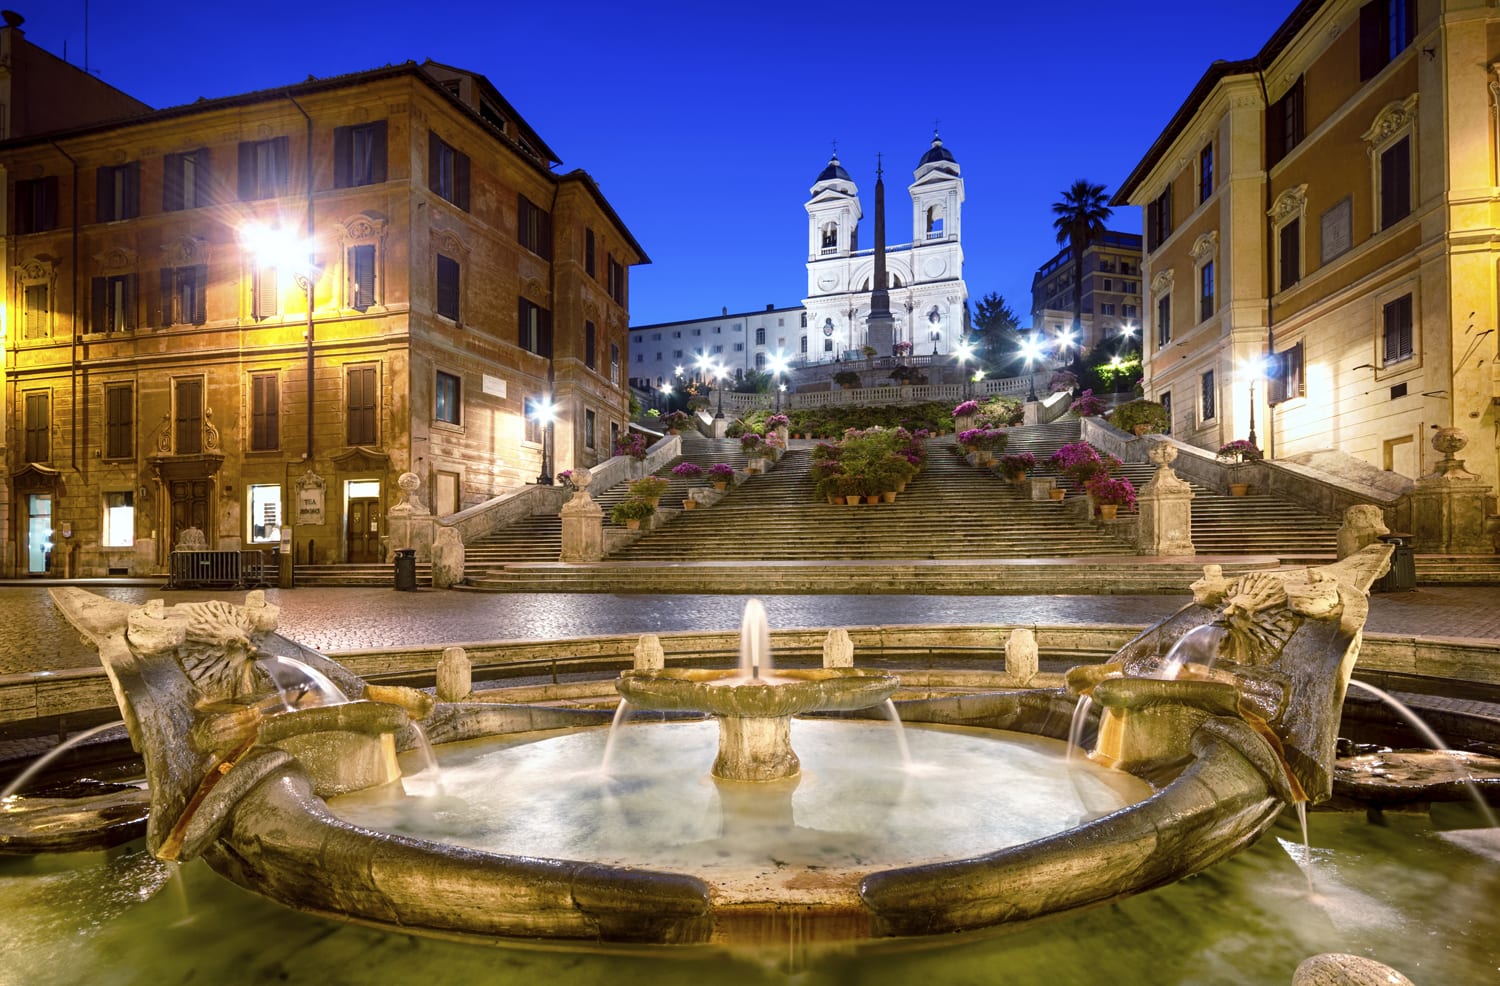 Sitting on the Spanish Steps & Other Ways to get Fined in Italy